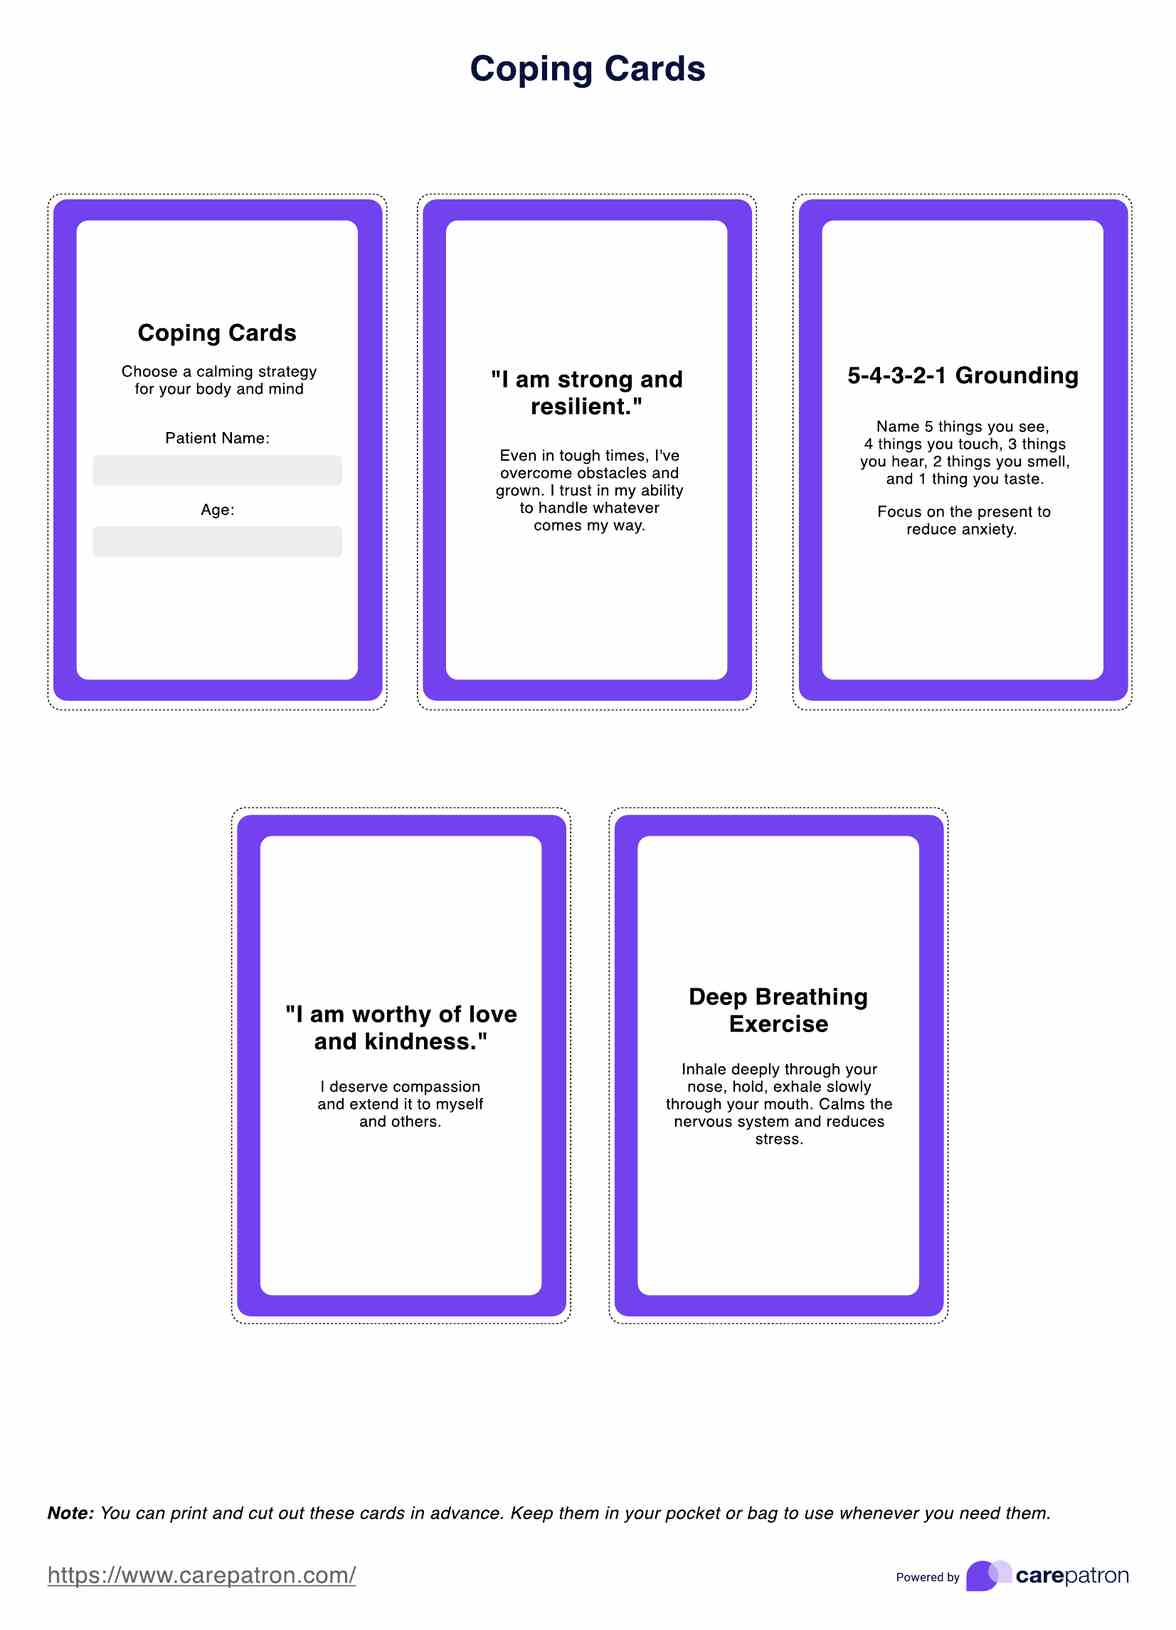 Coping Cards PDF Example